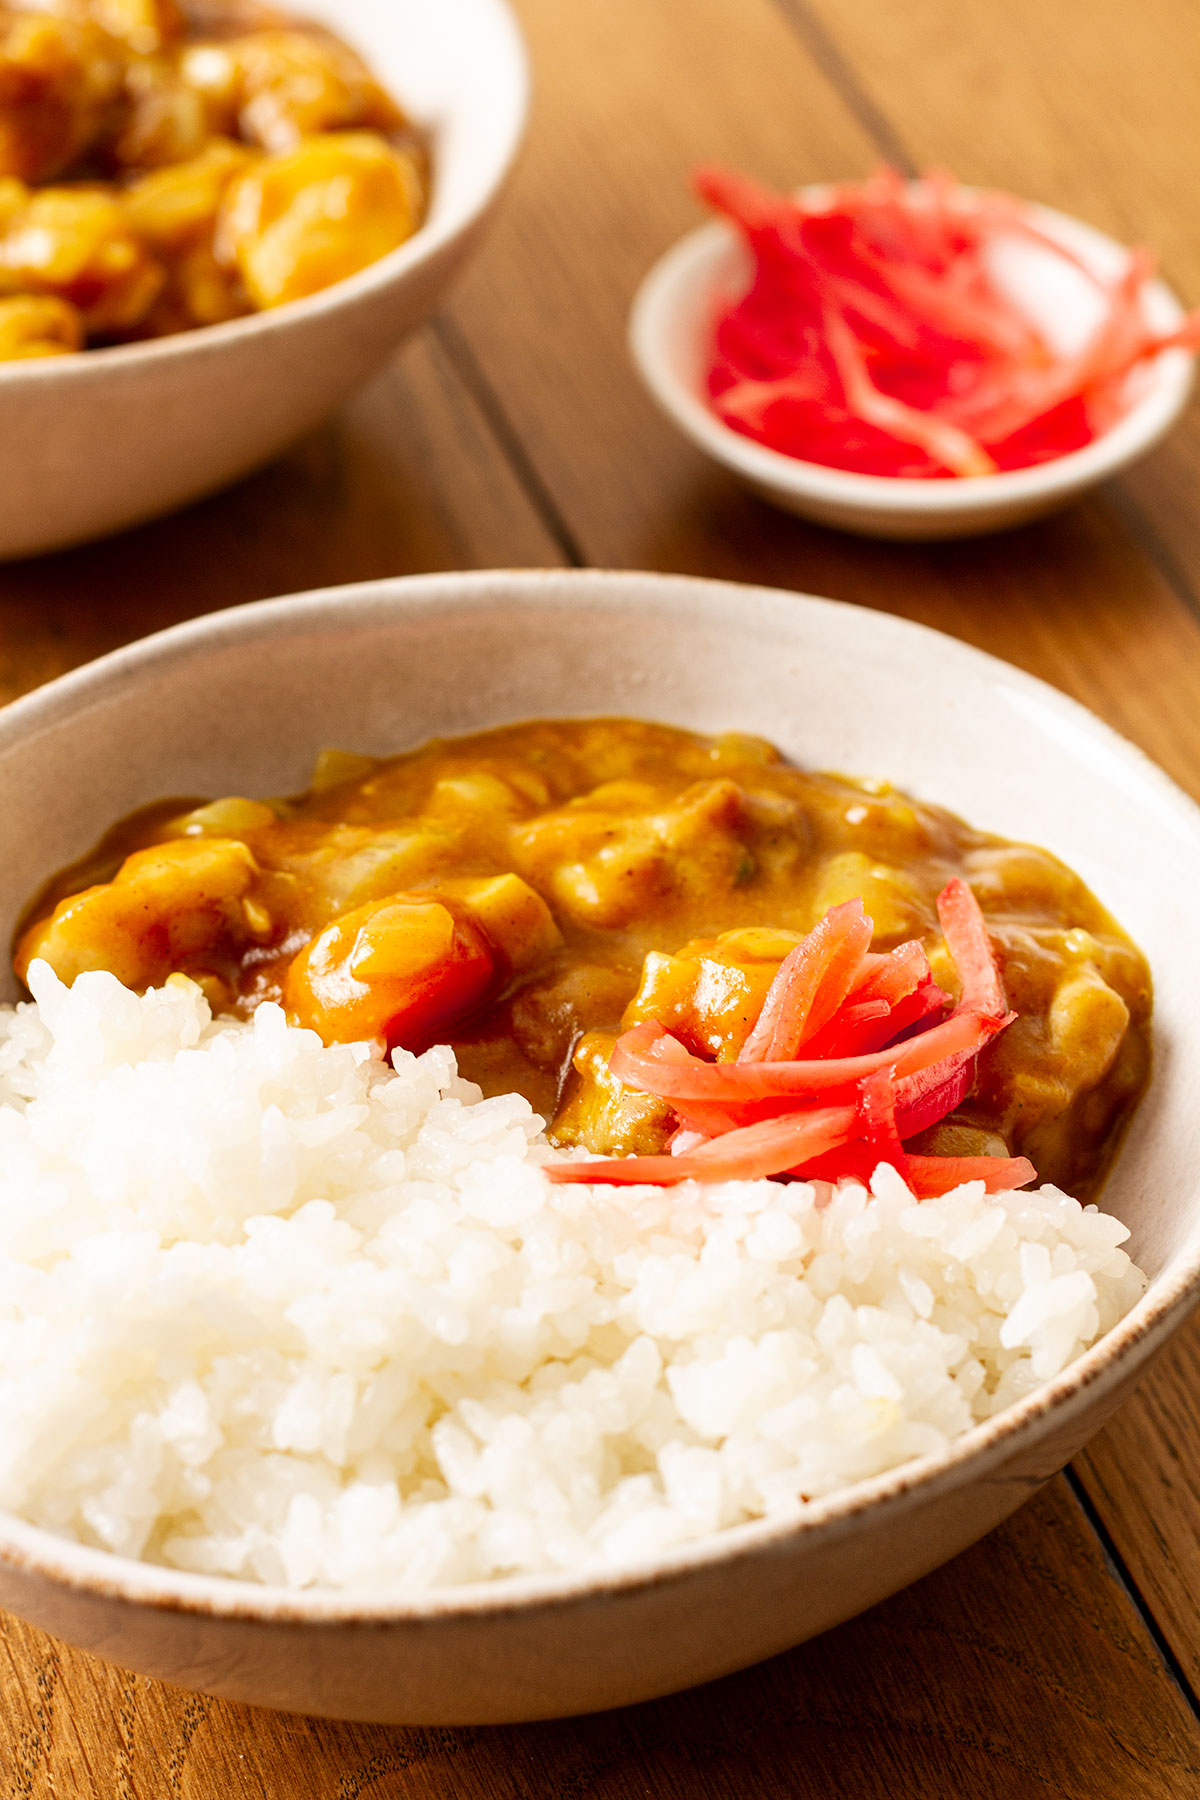 Japanese Prawn Curry with S&B Golden Curry 